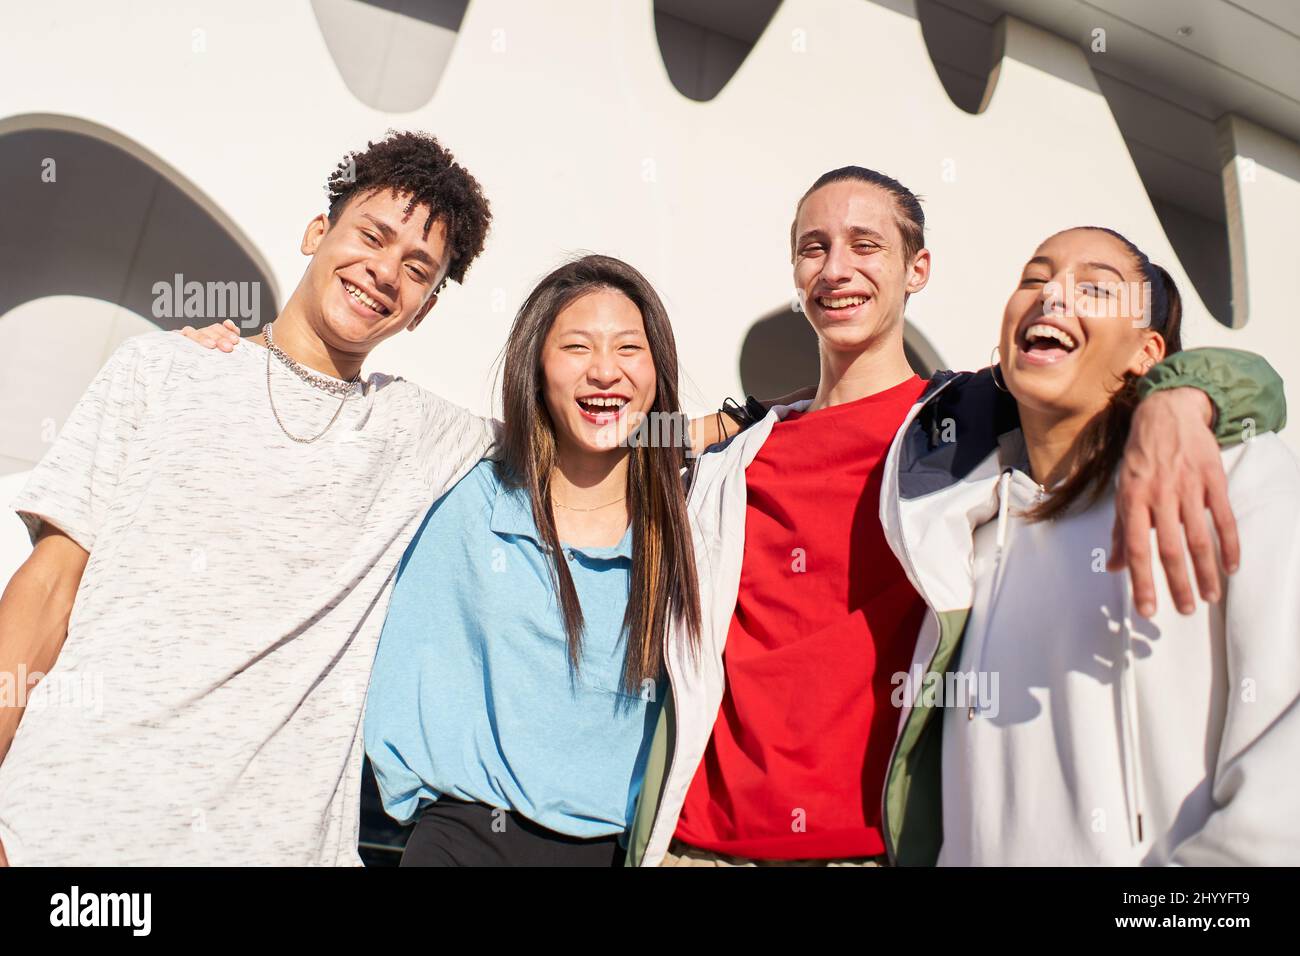 Group of friends having fun together outdoors. Portrait of multiethnic young students looking at the camera Stock Photo